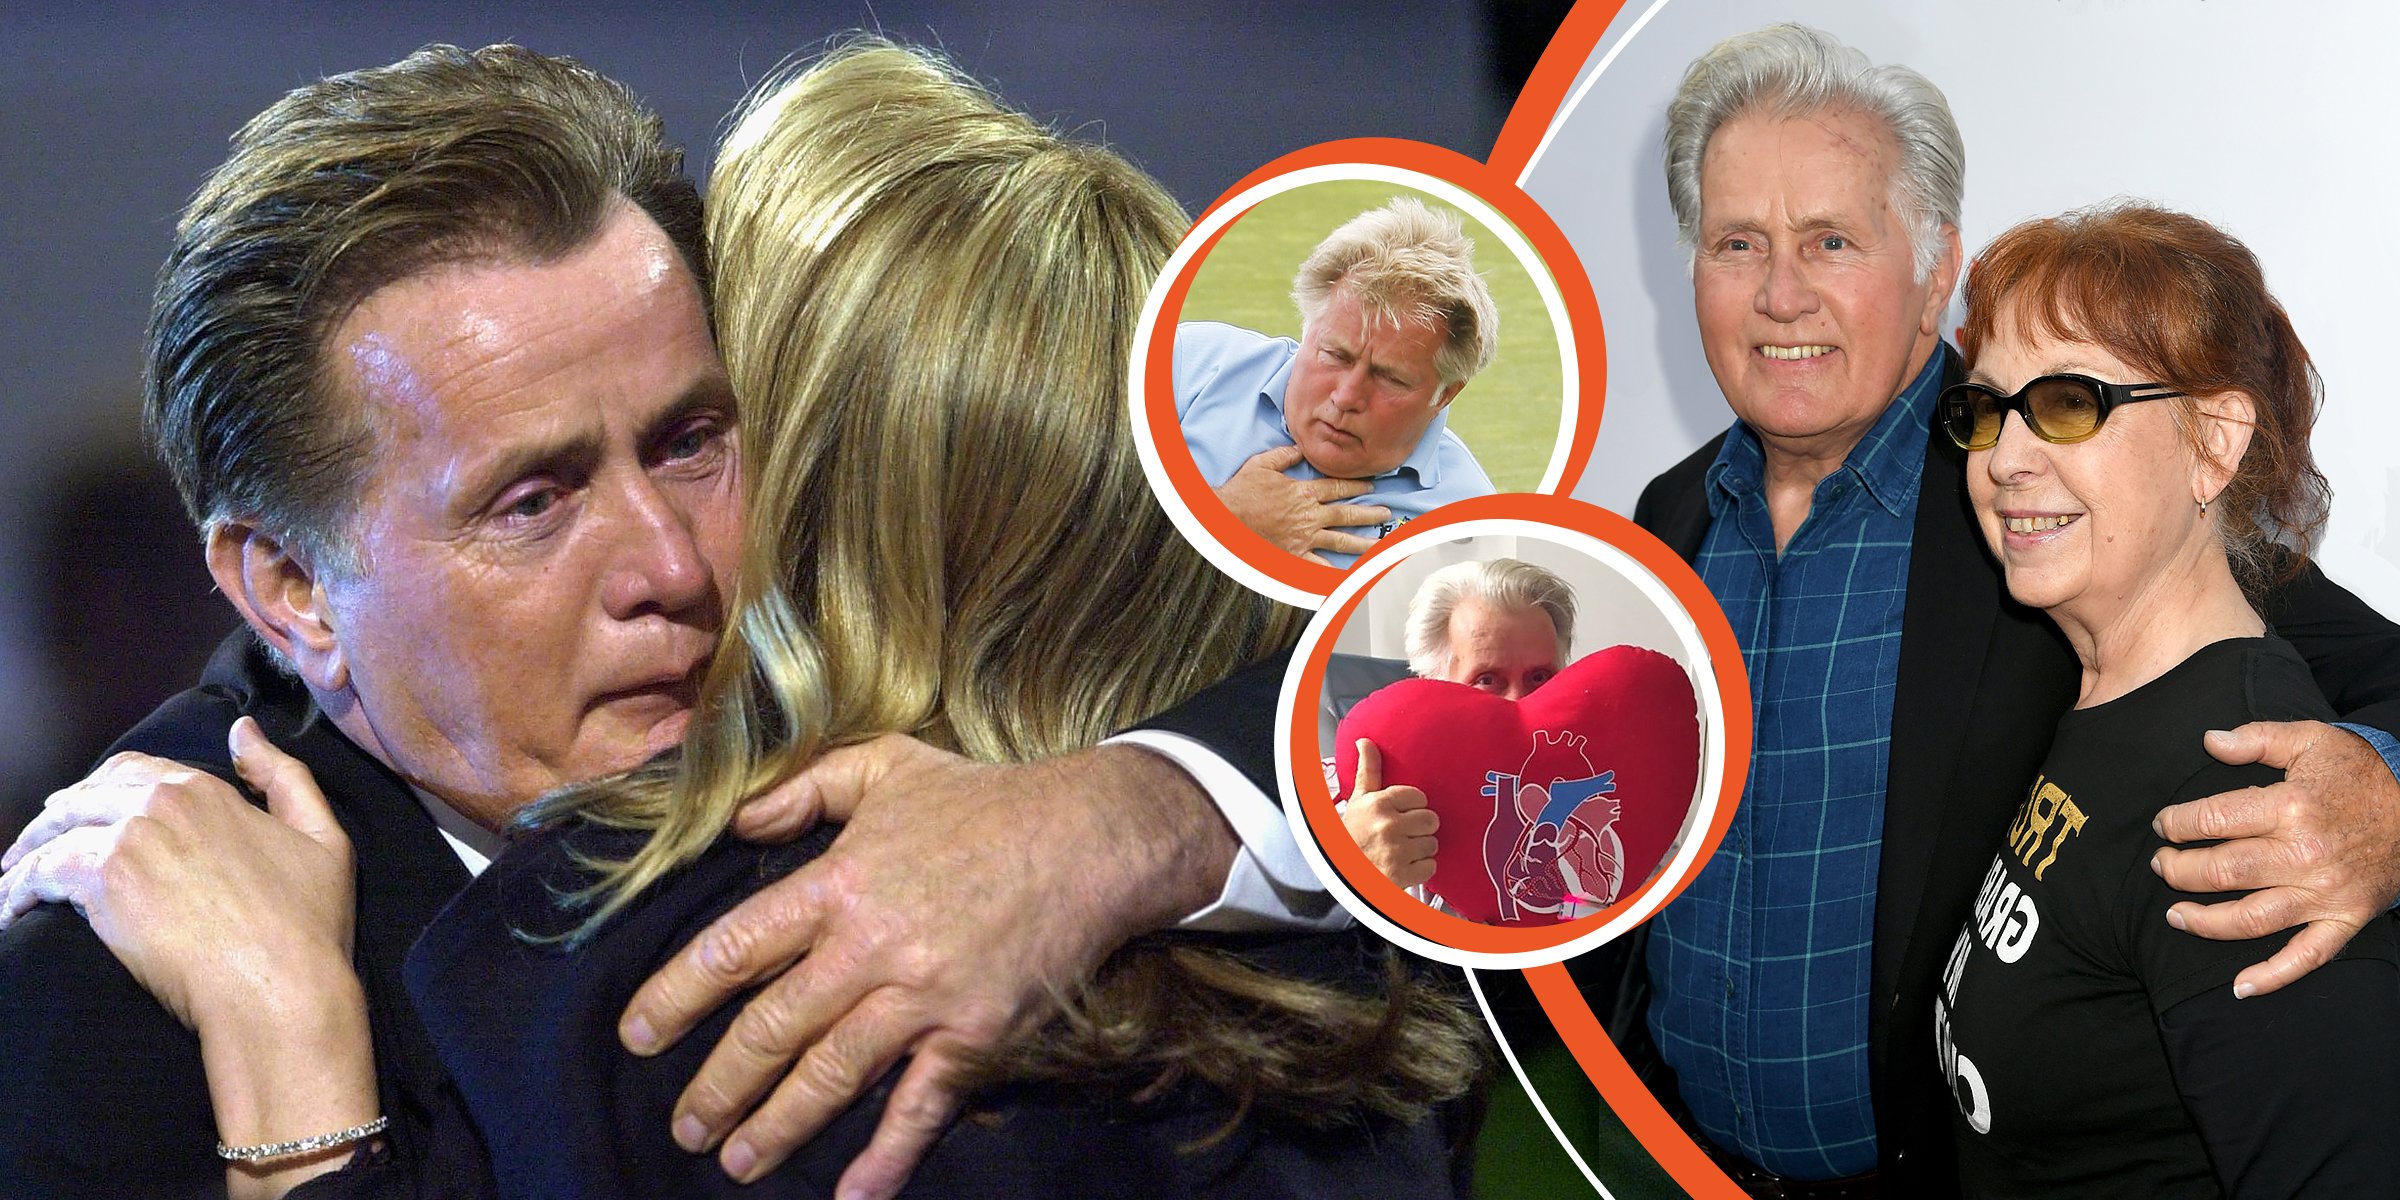 Martin Sheen with his wife Janet | Sheen [Inset] | Source: Getty Images | Twitter/Piers Morgan